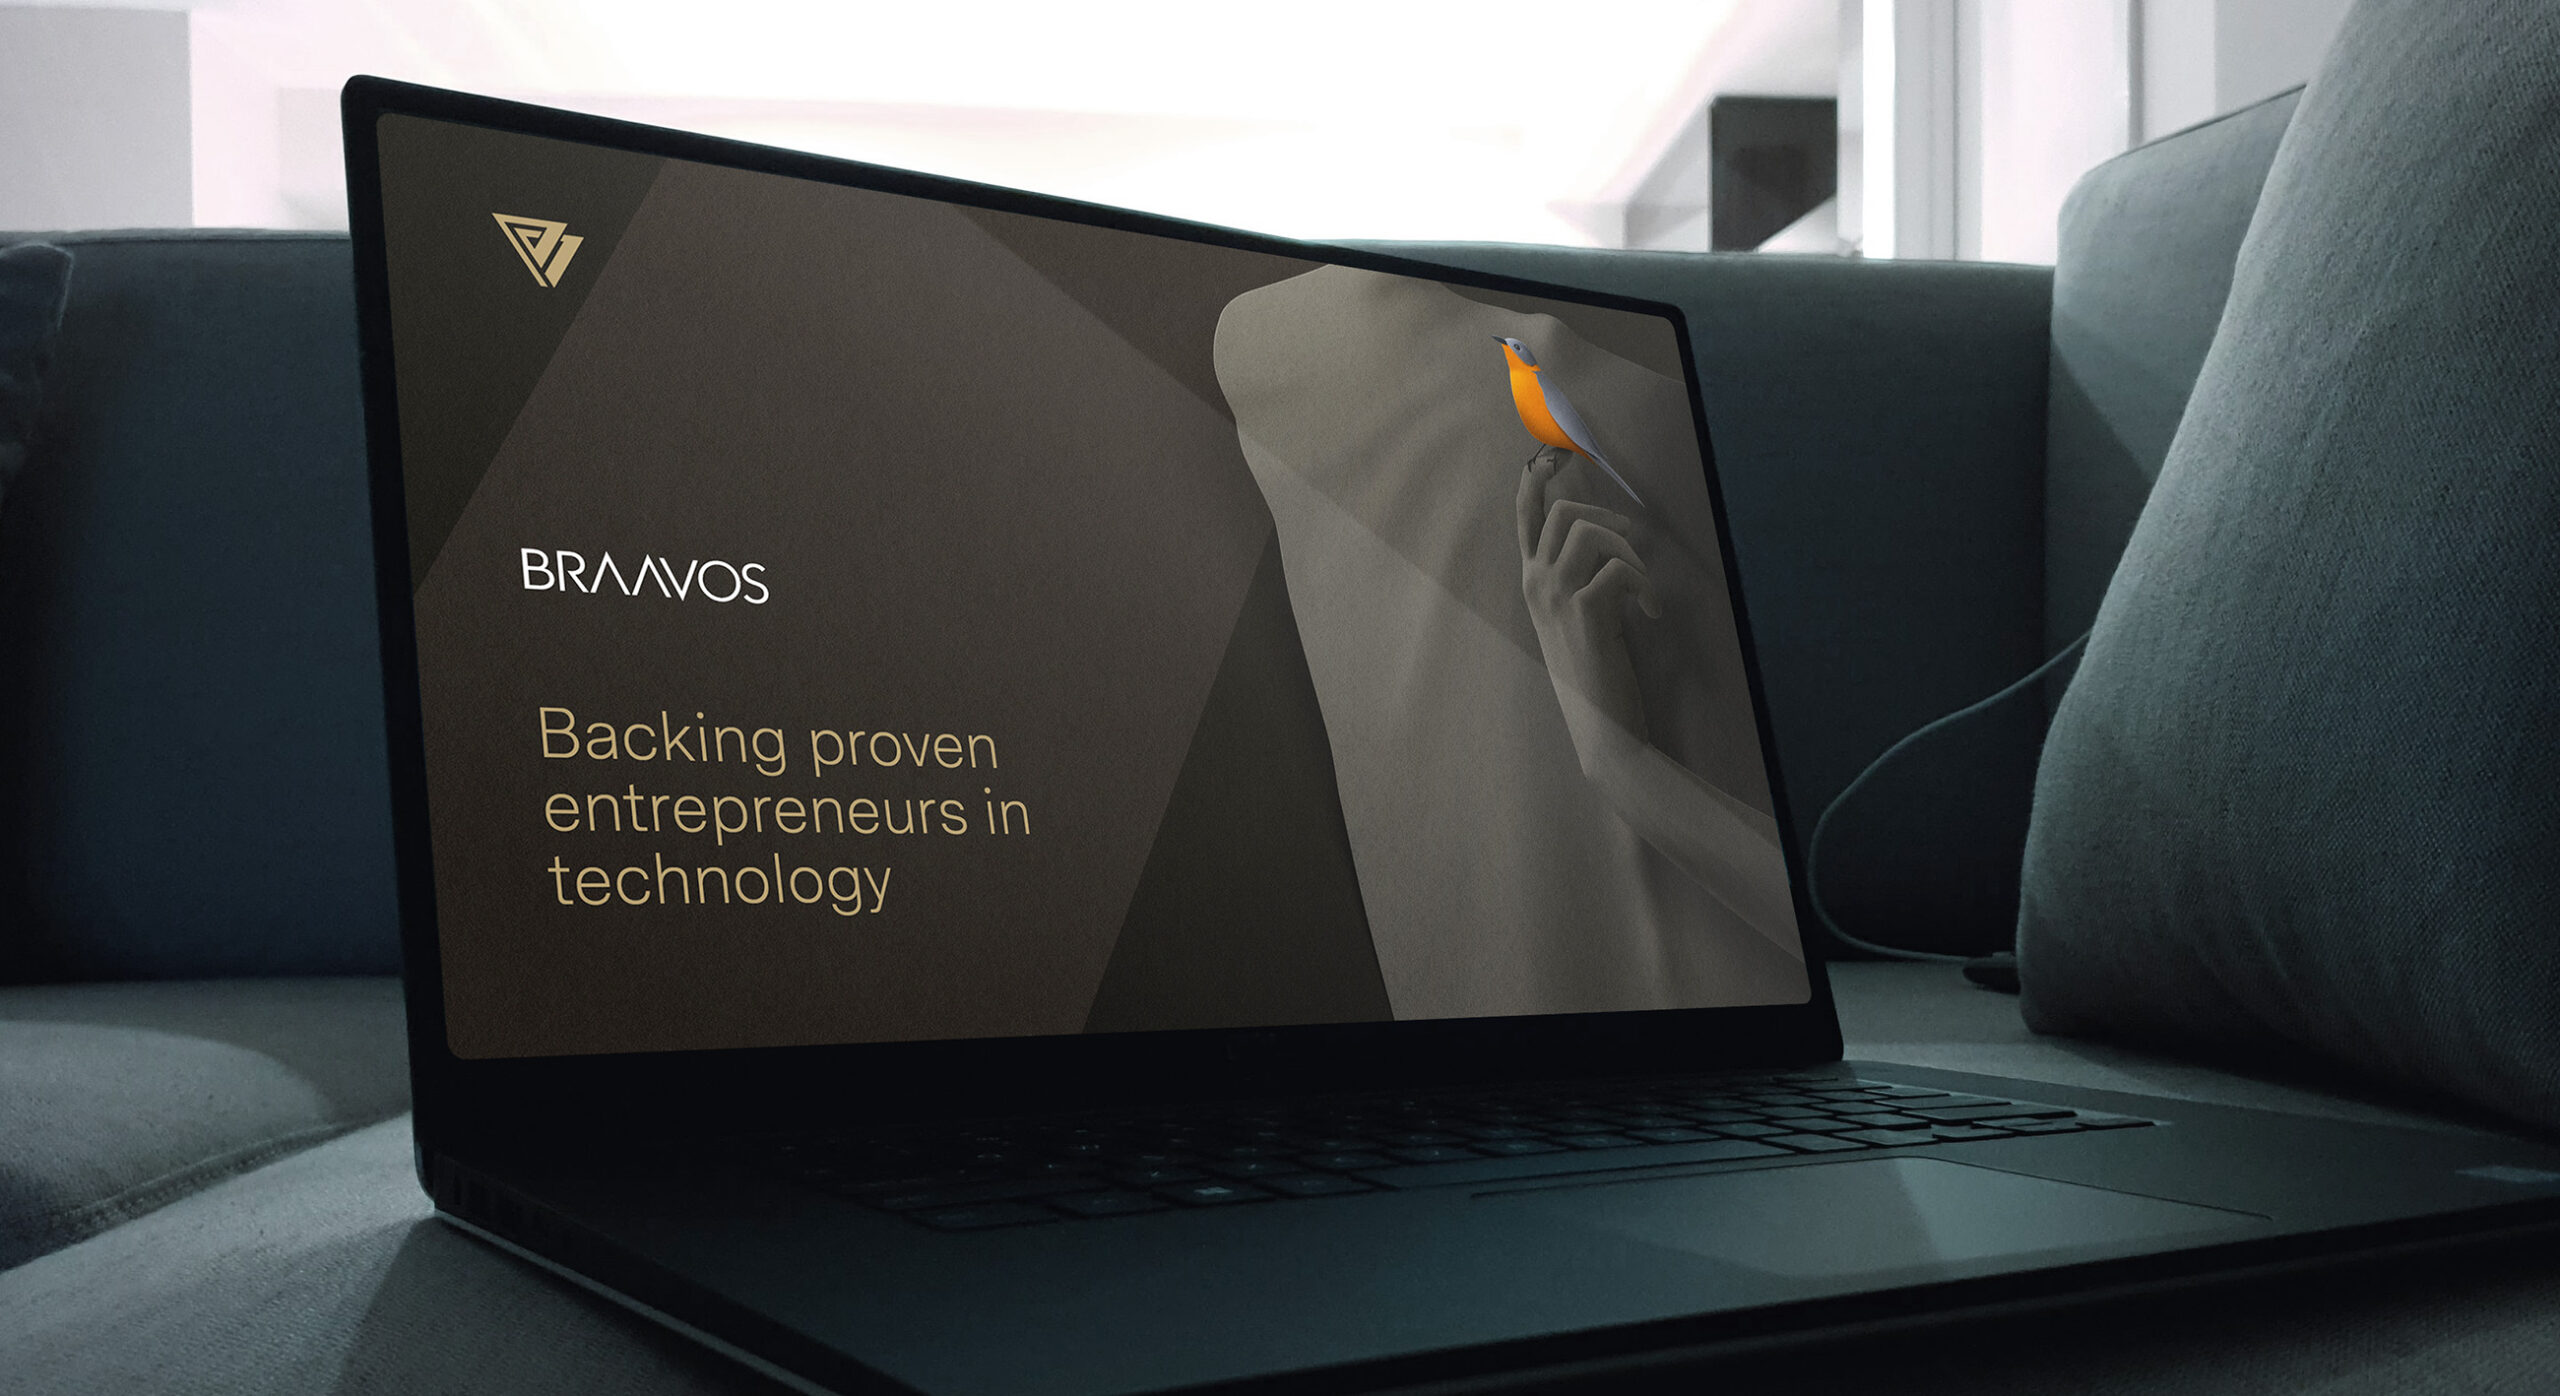 Along with print communications, Braavos relies on a variety of digital communications assets. The PPT template uses the moody look and feel to create a premium aesthetic.